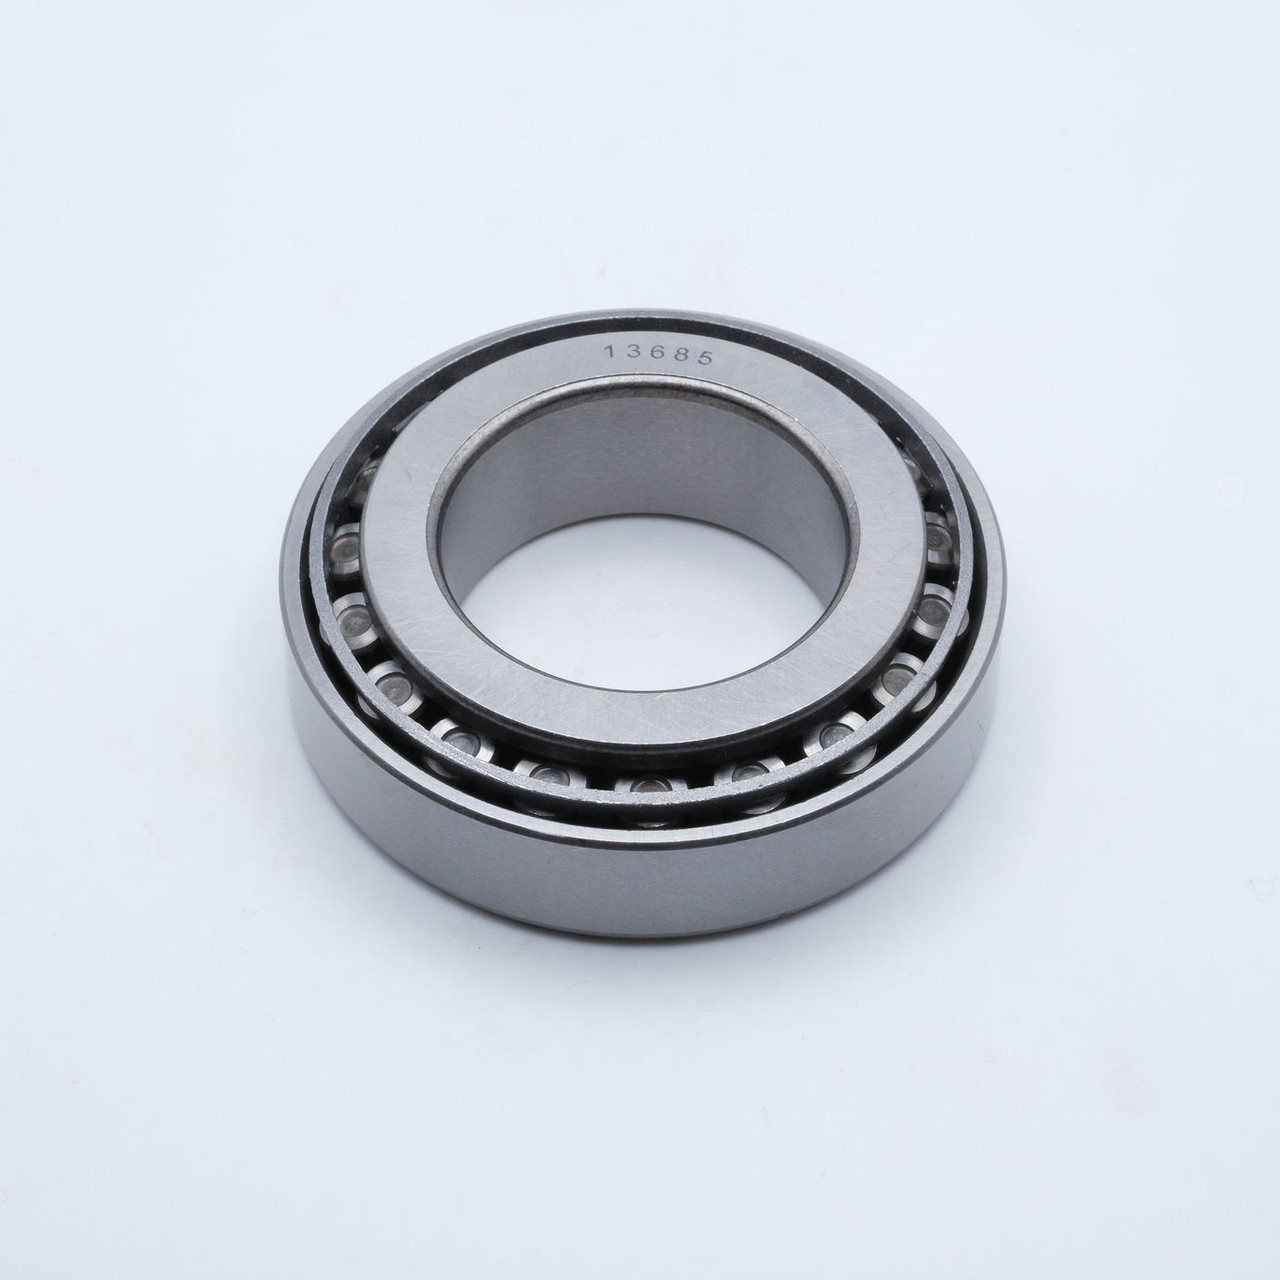 LM29748/10 Tapered Roller Bearing Set 1-1/2x2-9/16x0.710 Back View